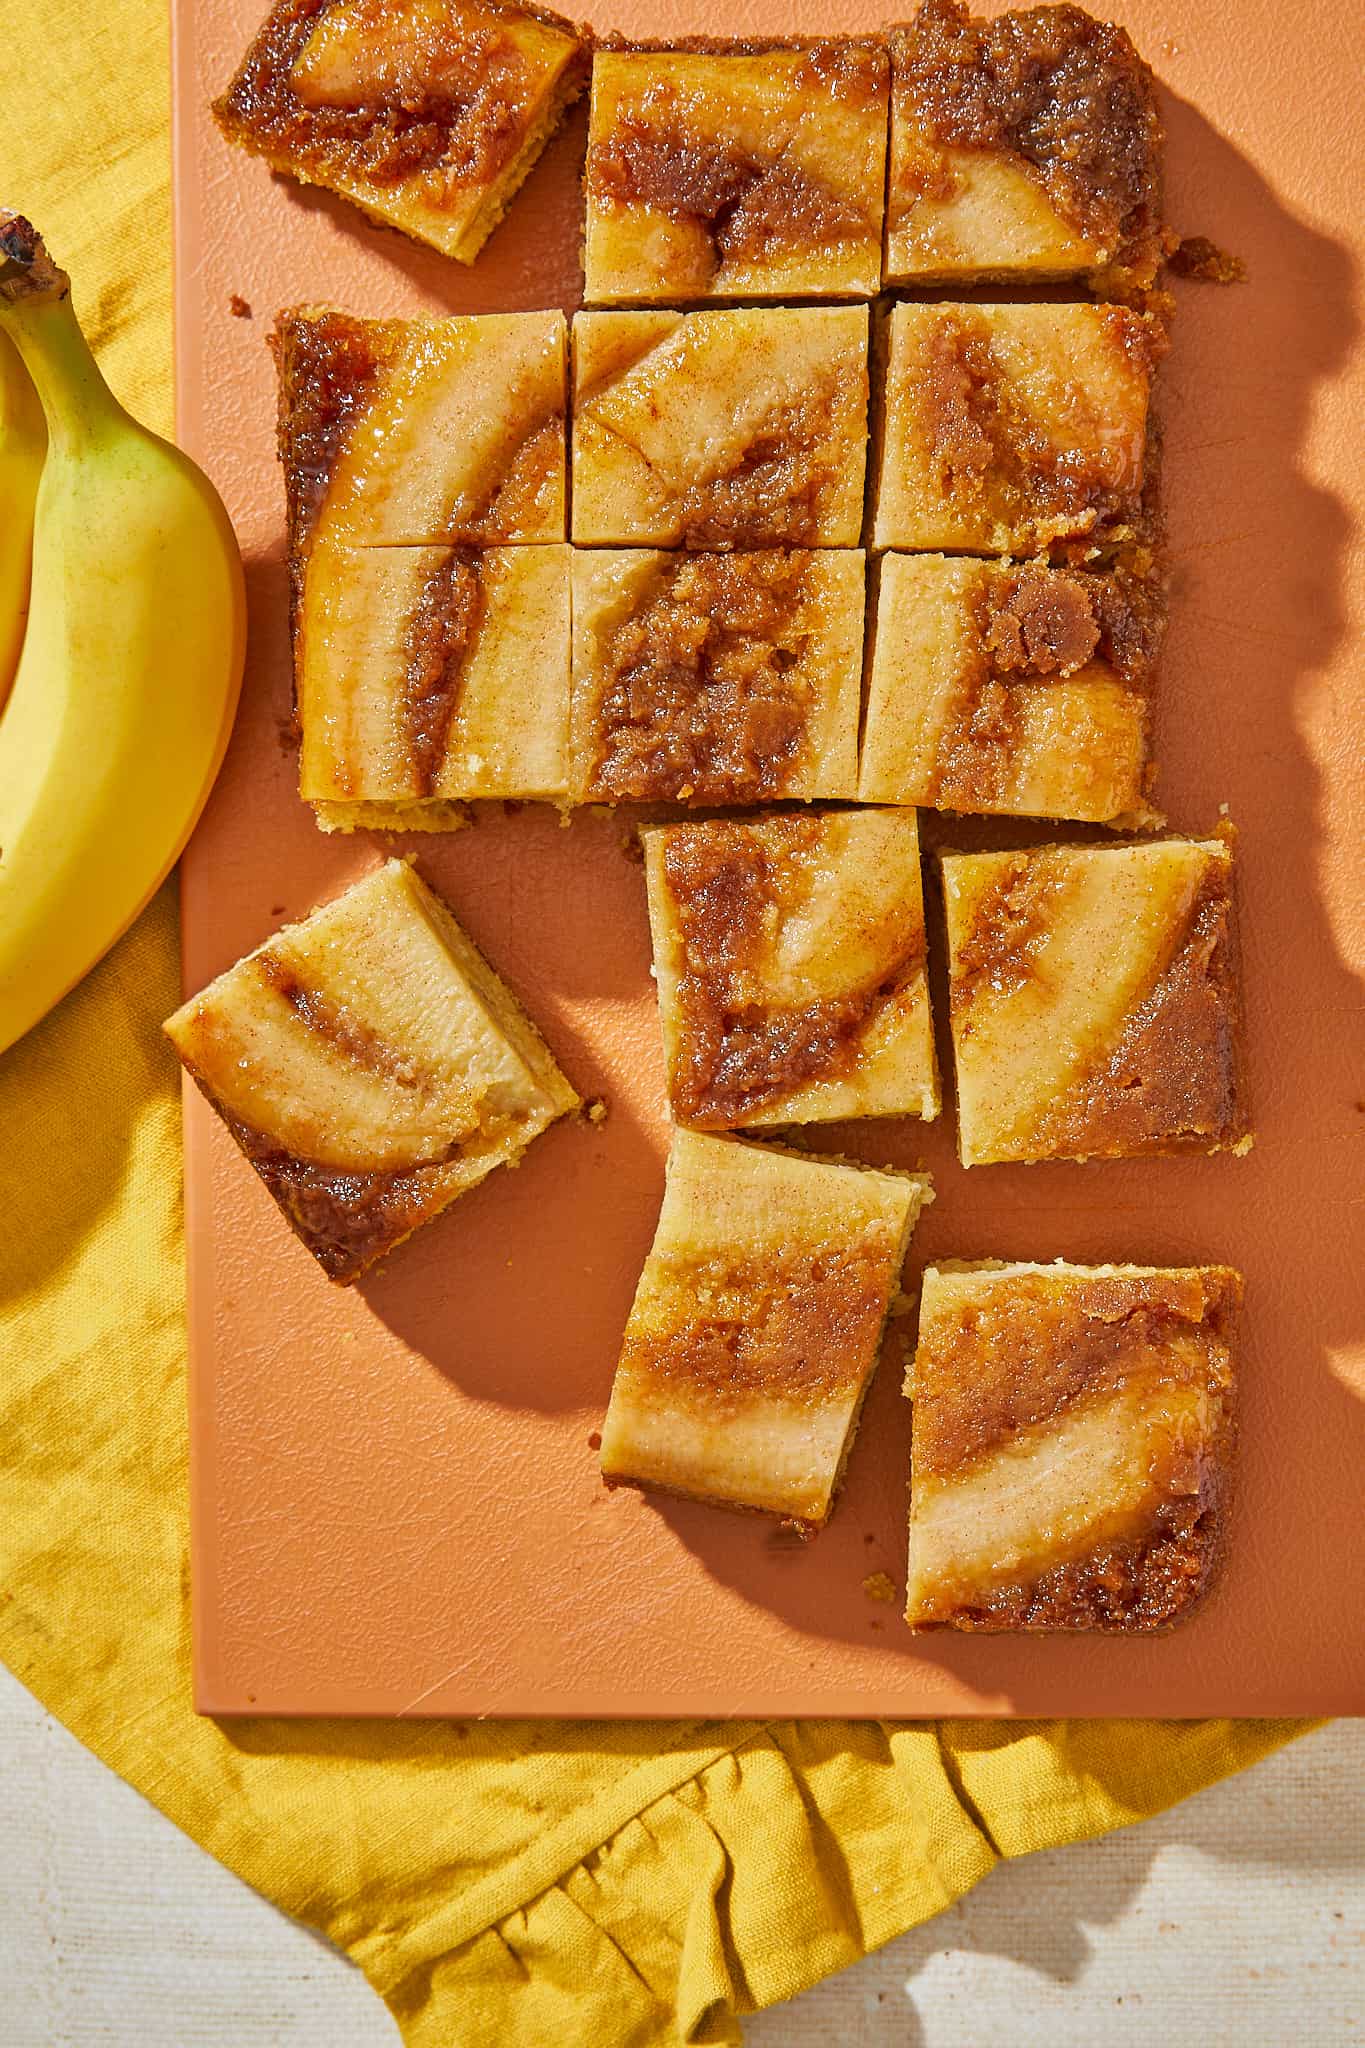 A gooey caramelized banana upside down cake with slices cut out.